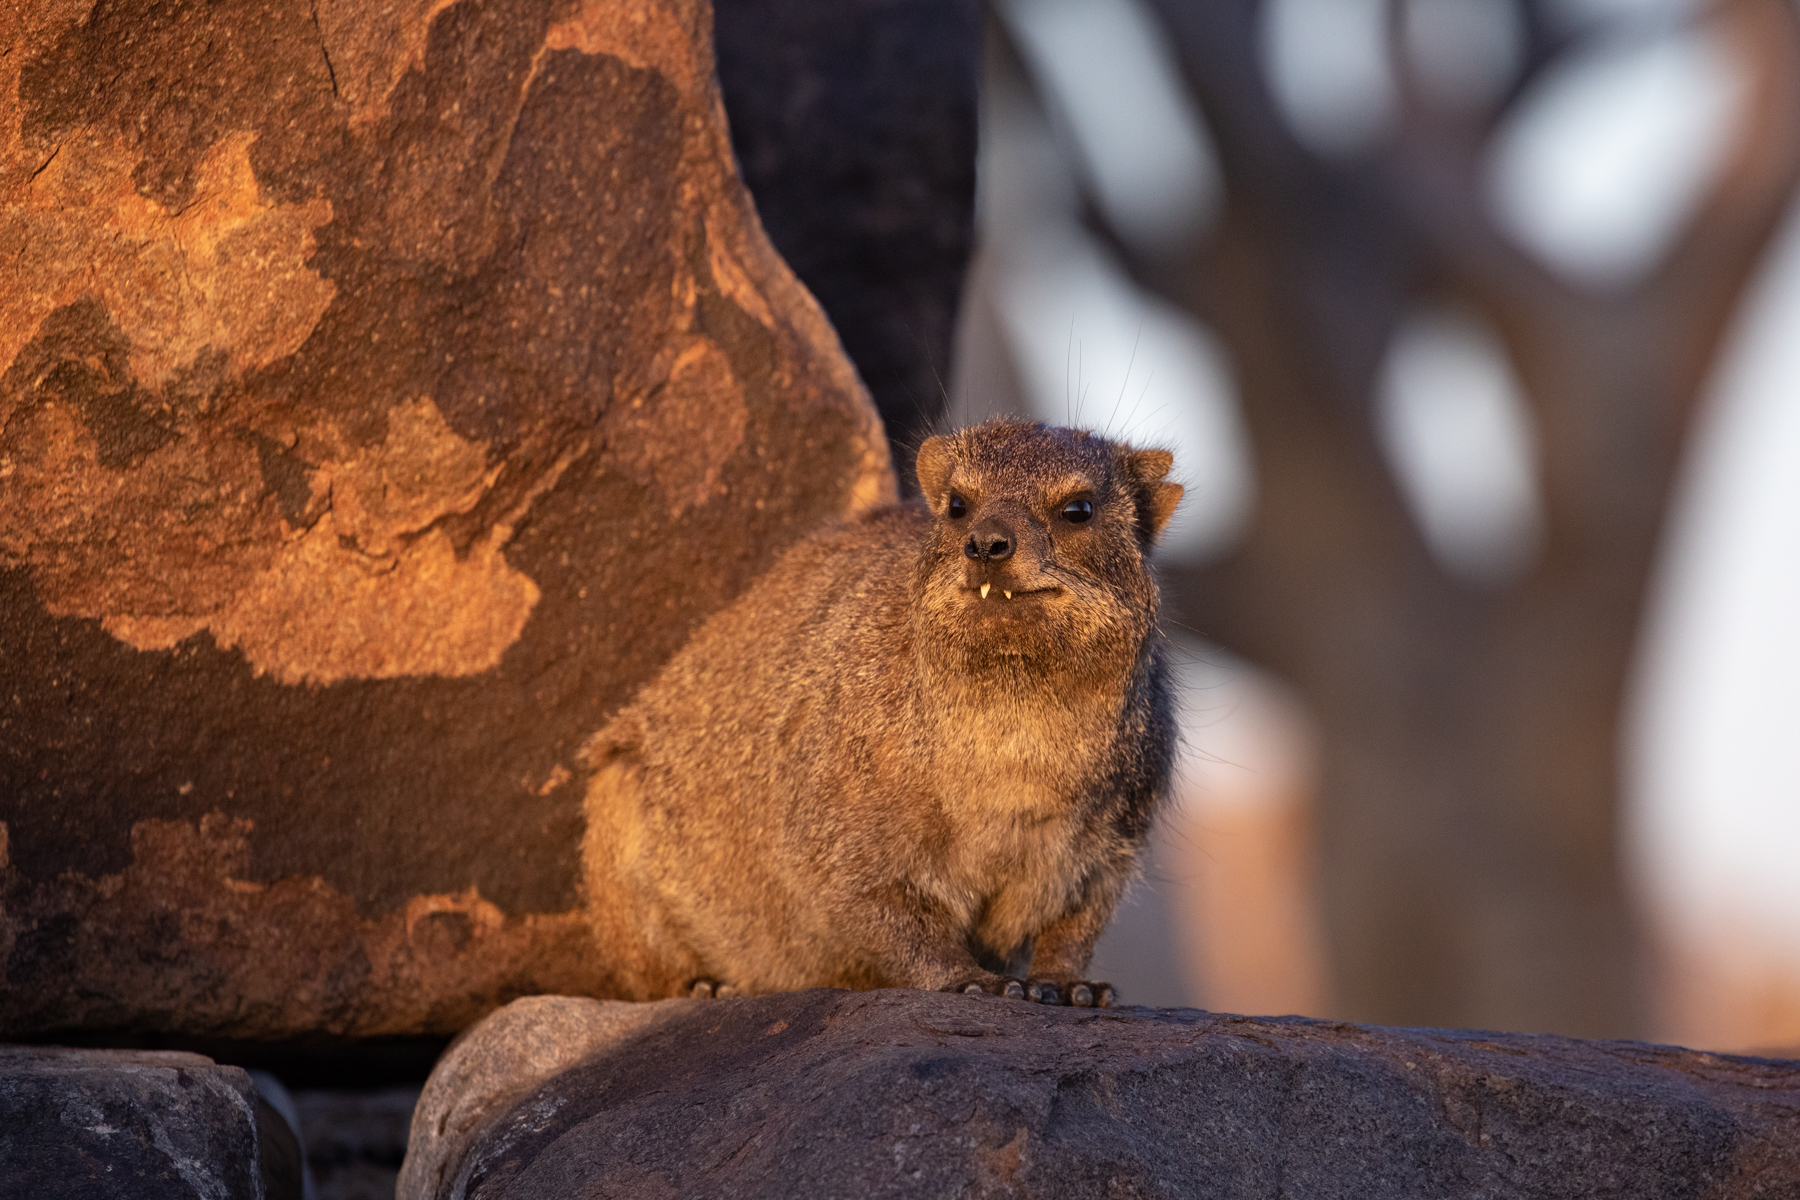 Rock Hyraxes can look quite buck-teethed when they look at you